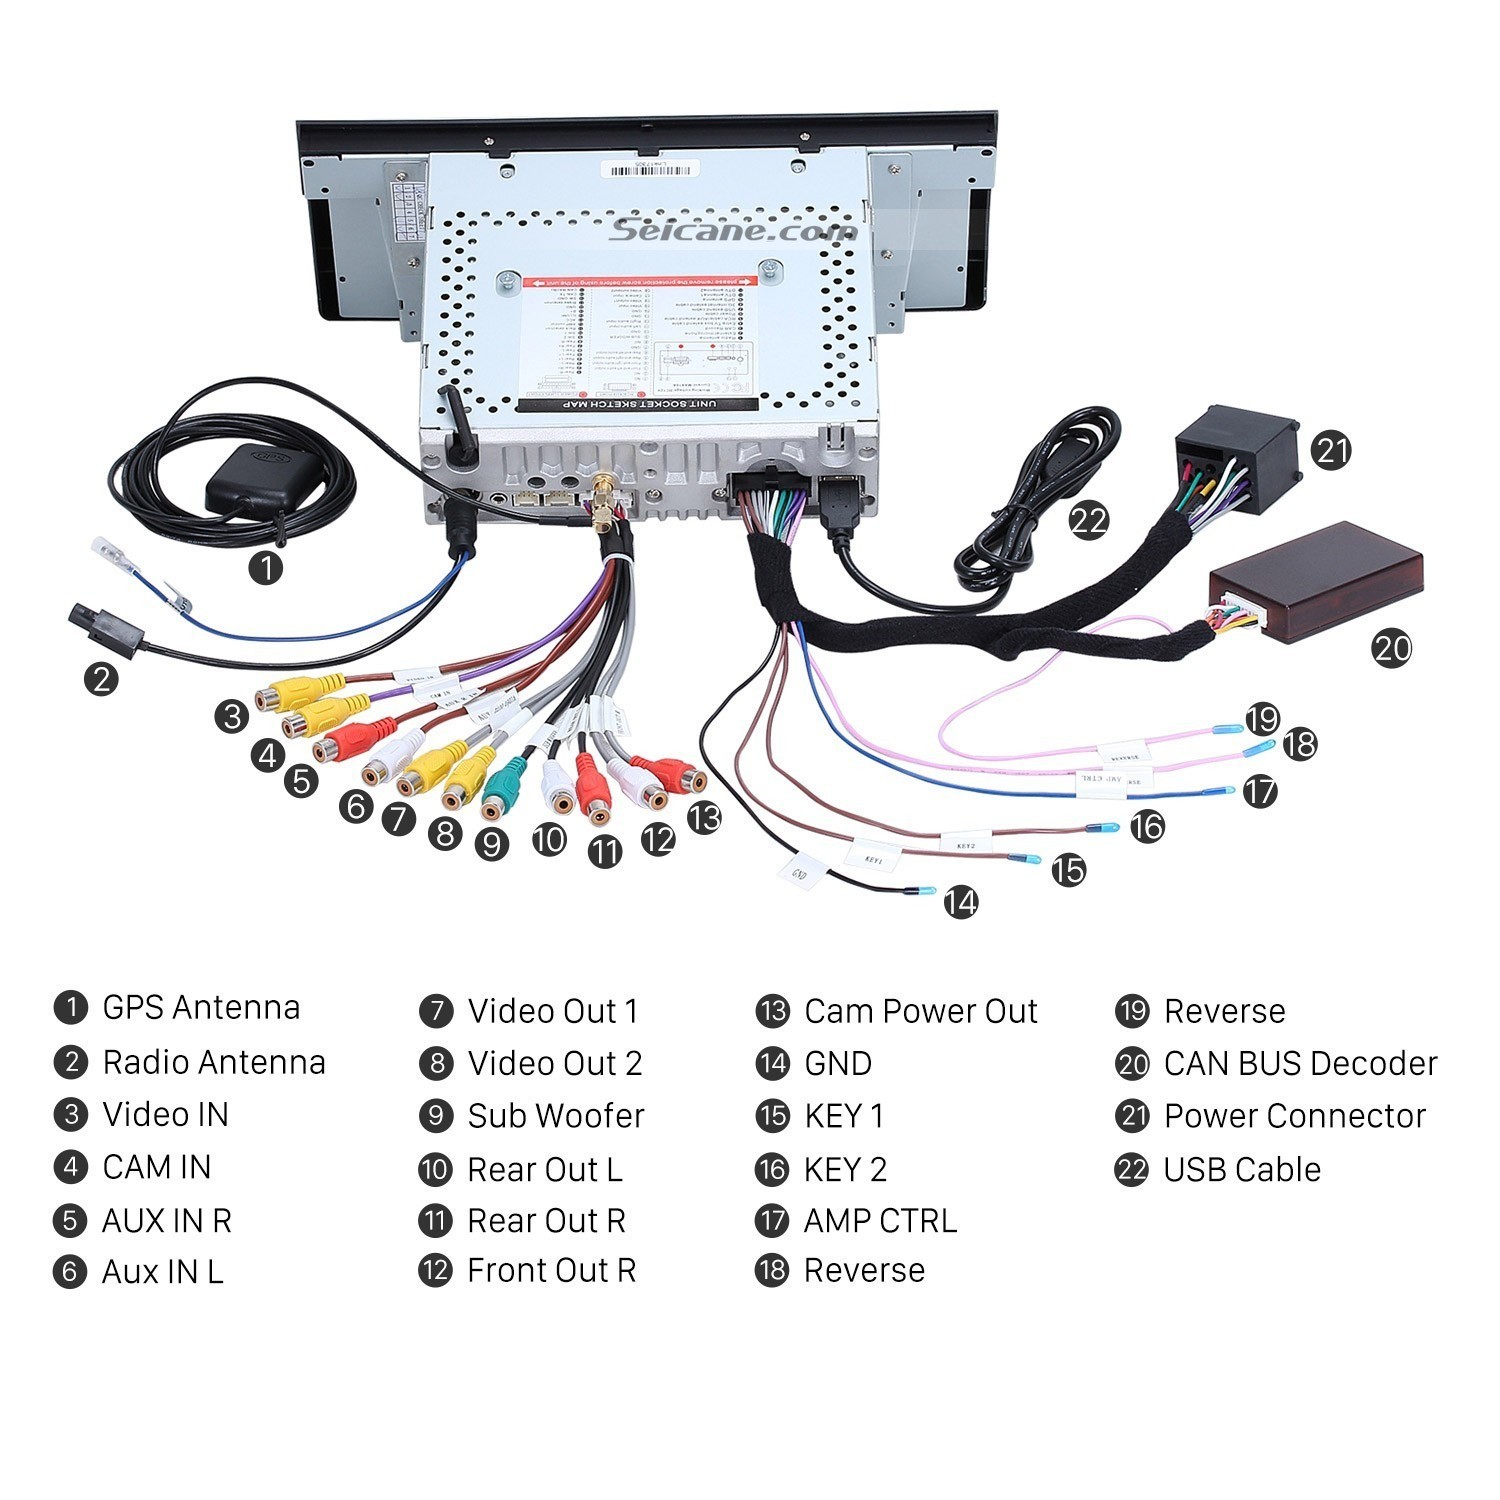 2 Amps 2 Subs Wiring Diagram Wiring Diagram for Amp Installation Inspirationa Diagram Car Best